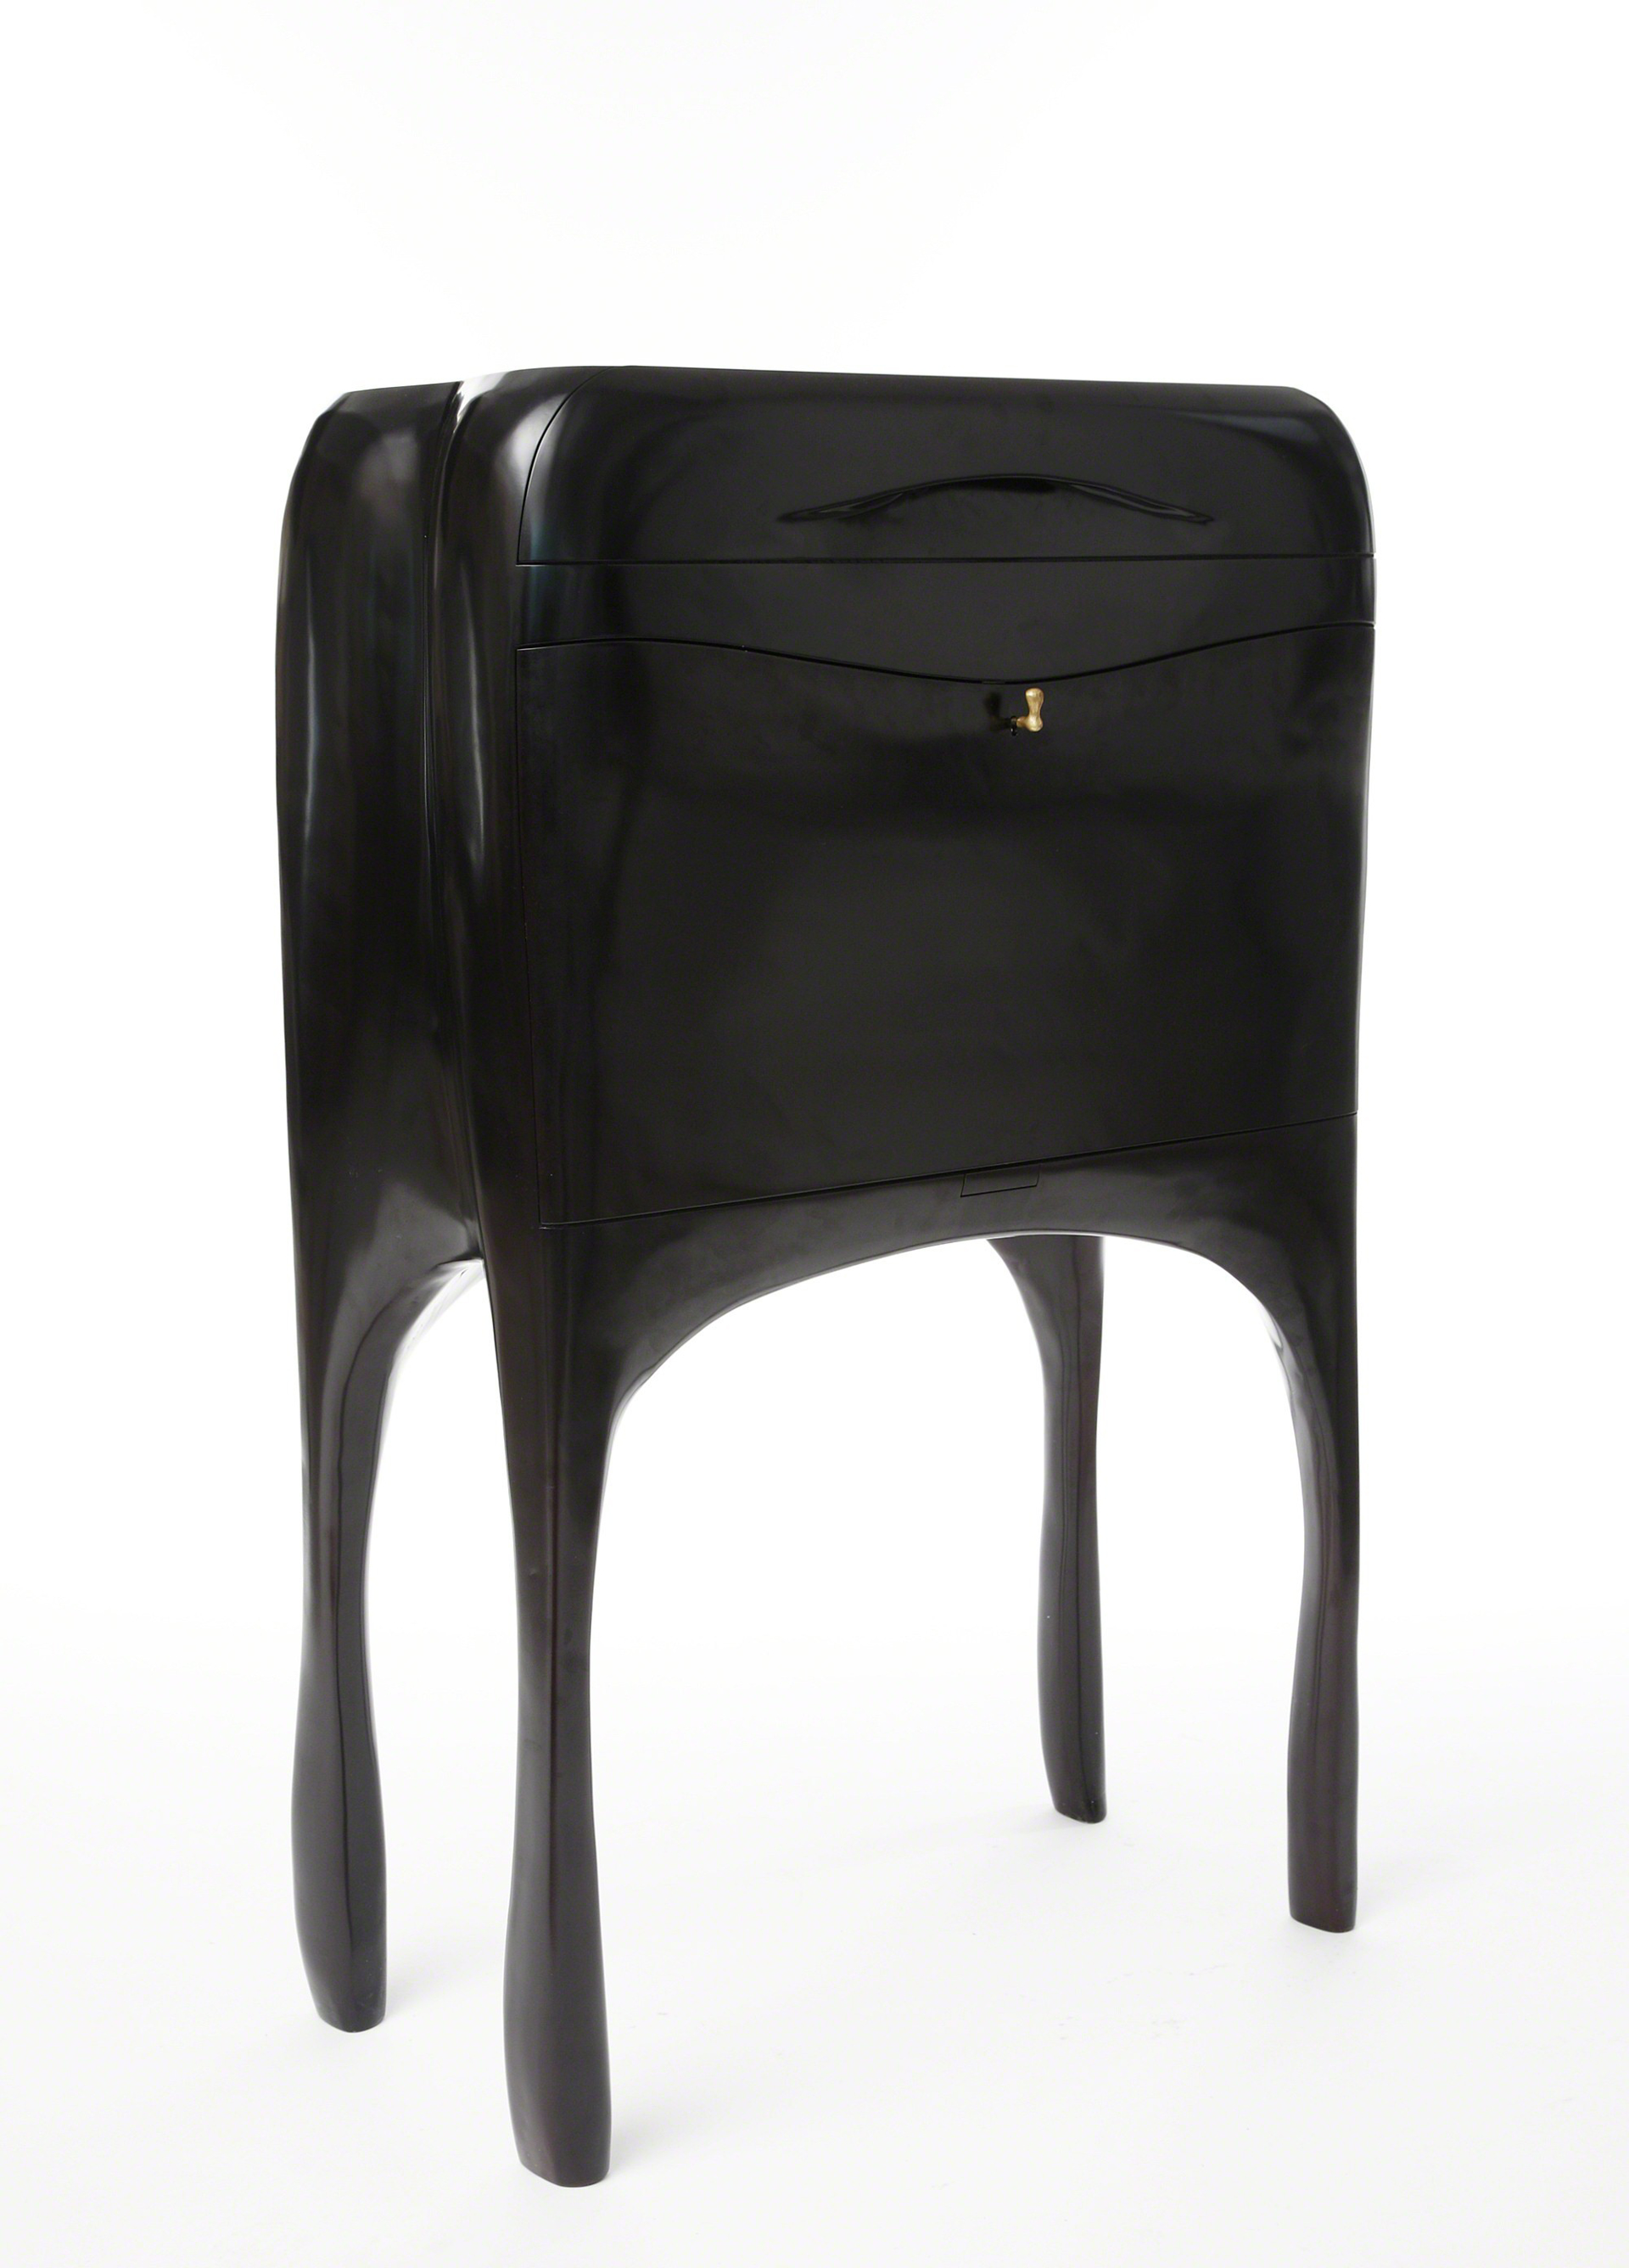 "Toro" Cabinet by Jacques Jarrige